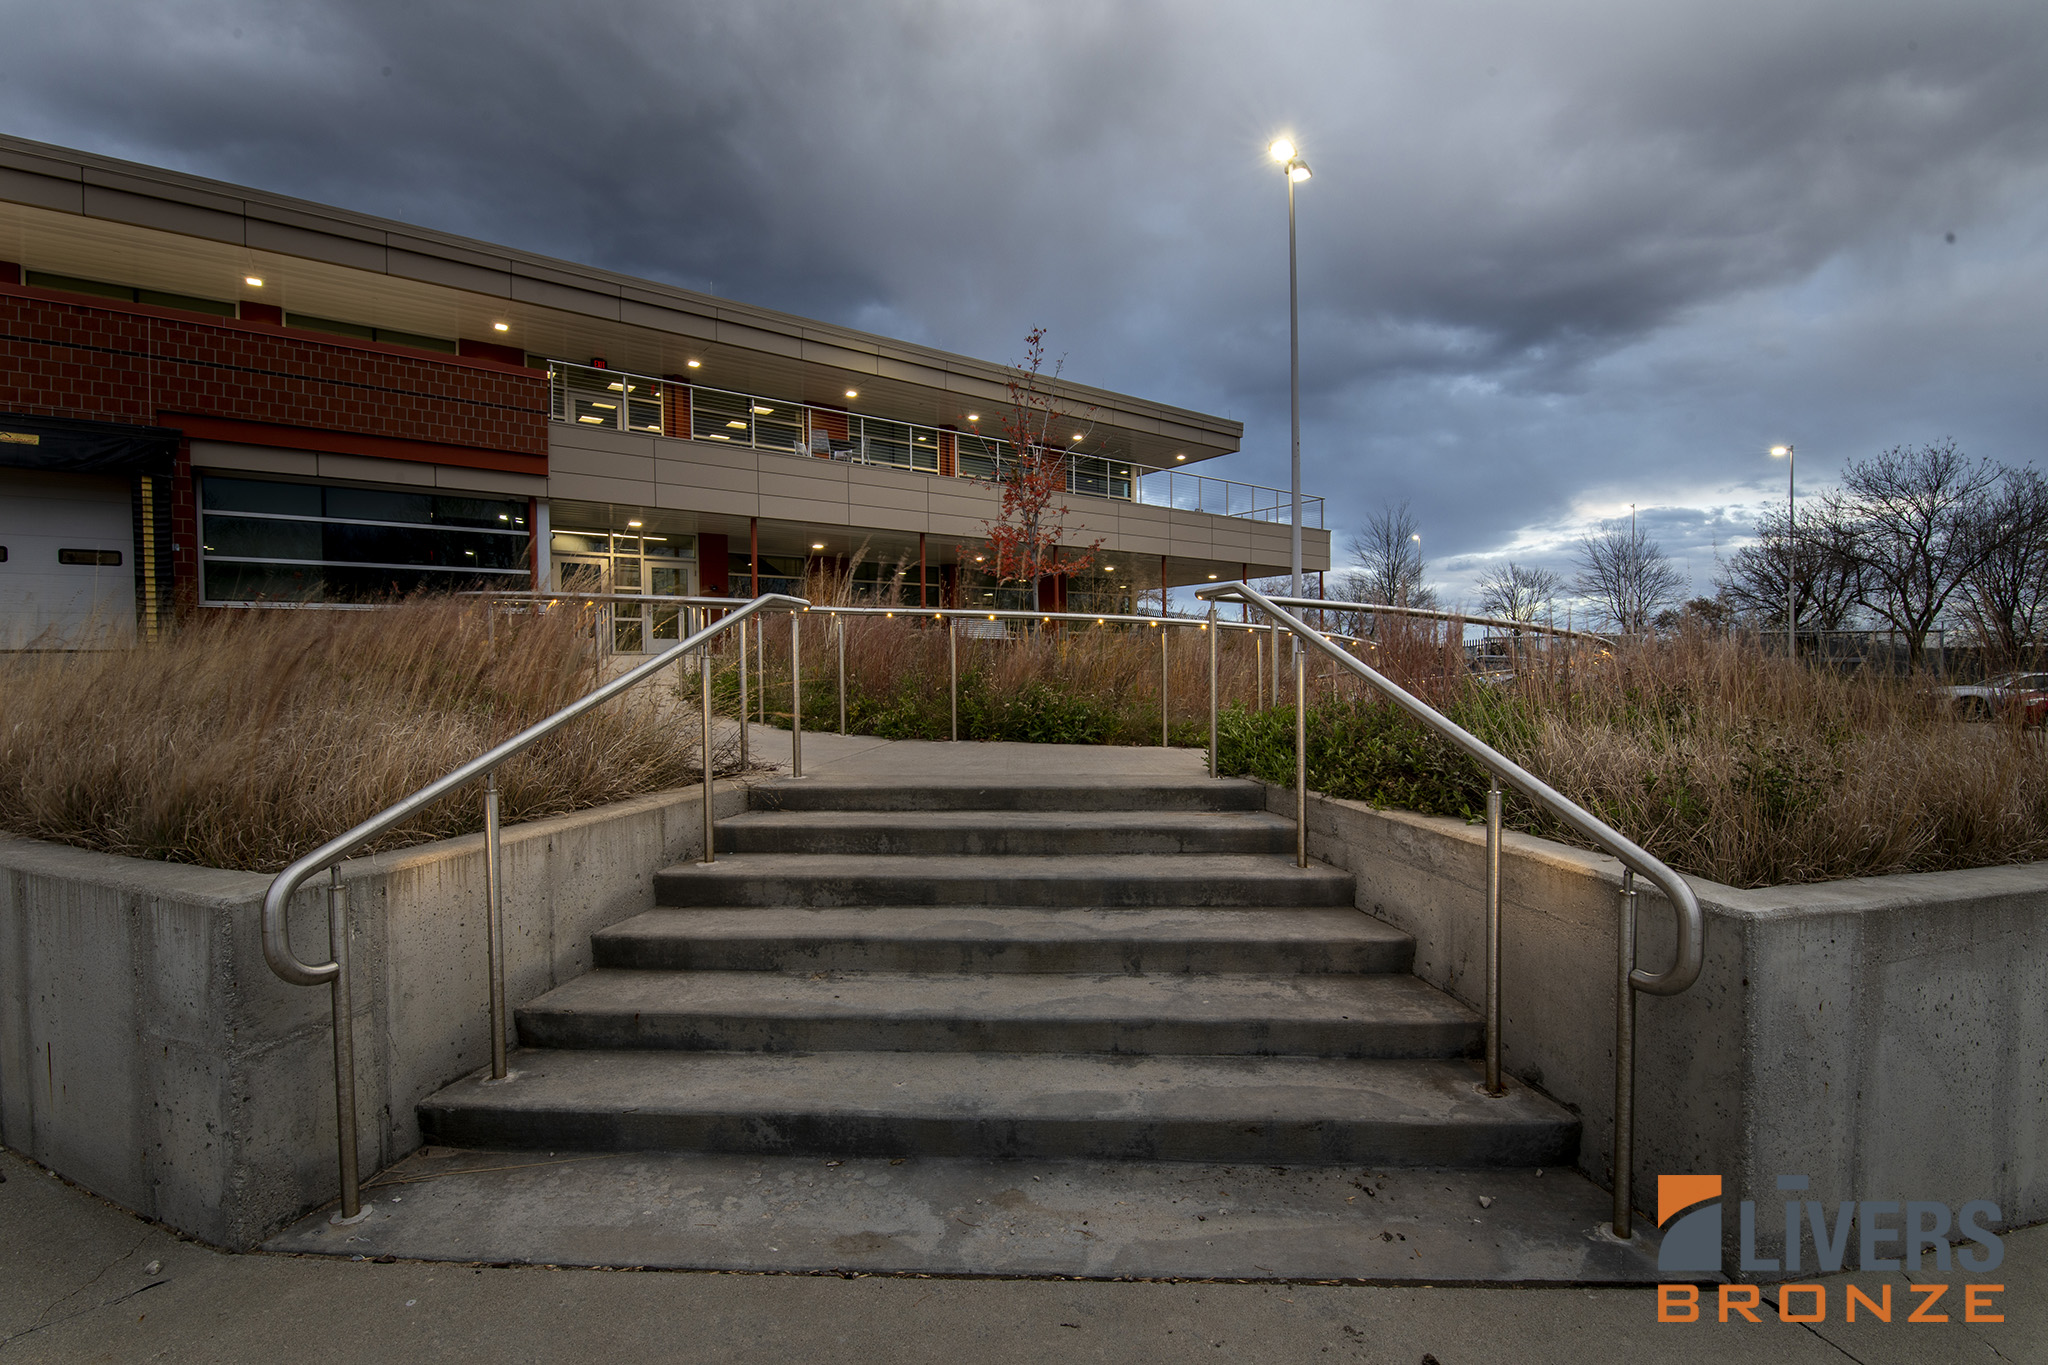 Livers Bronze Illume Puck LED curved railings were installed along the exterior pedestrian ramp at MidAmerican Energy Headquarters, Urbandale, Iowa, and were Made in the USA..